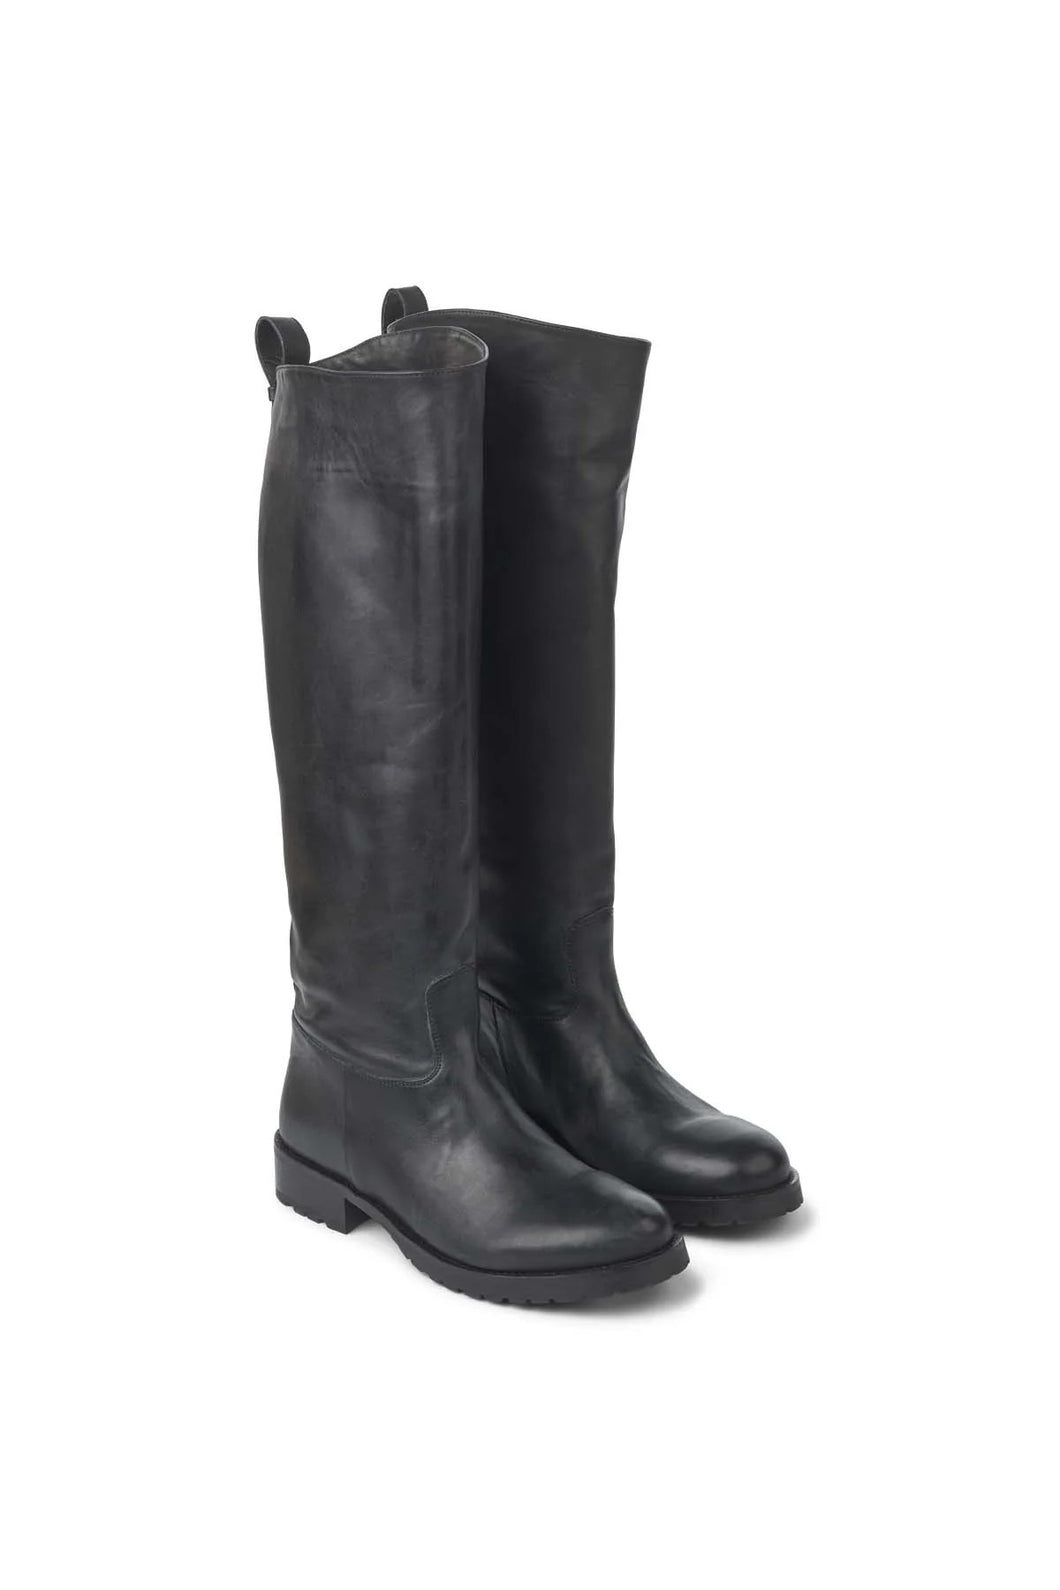 Rabens Saloner Marit Leather Riding Boot  W23333506 - more colours